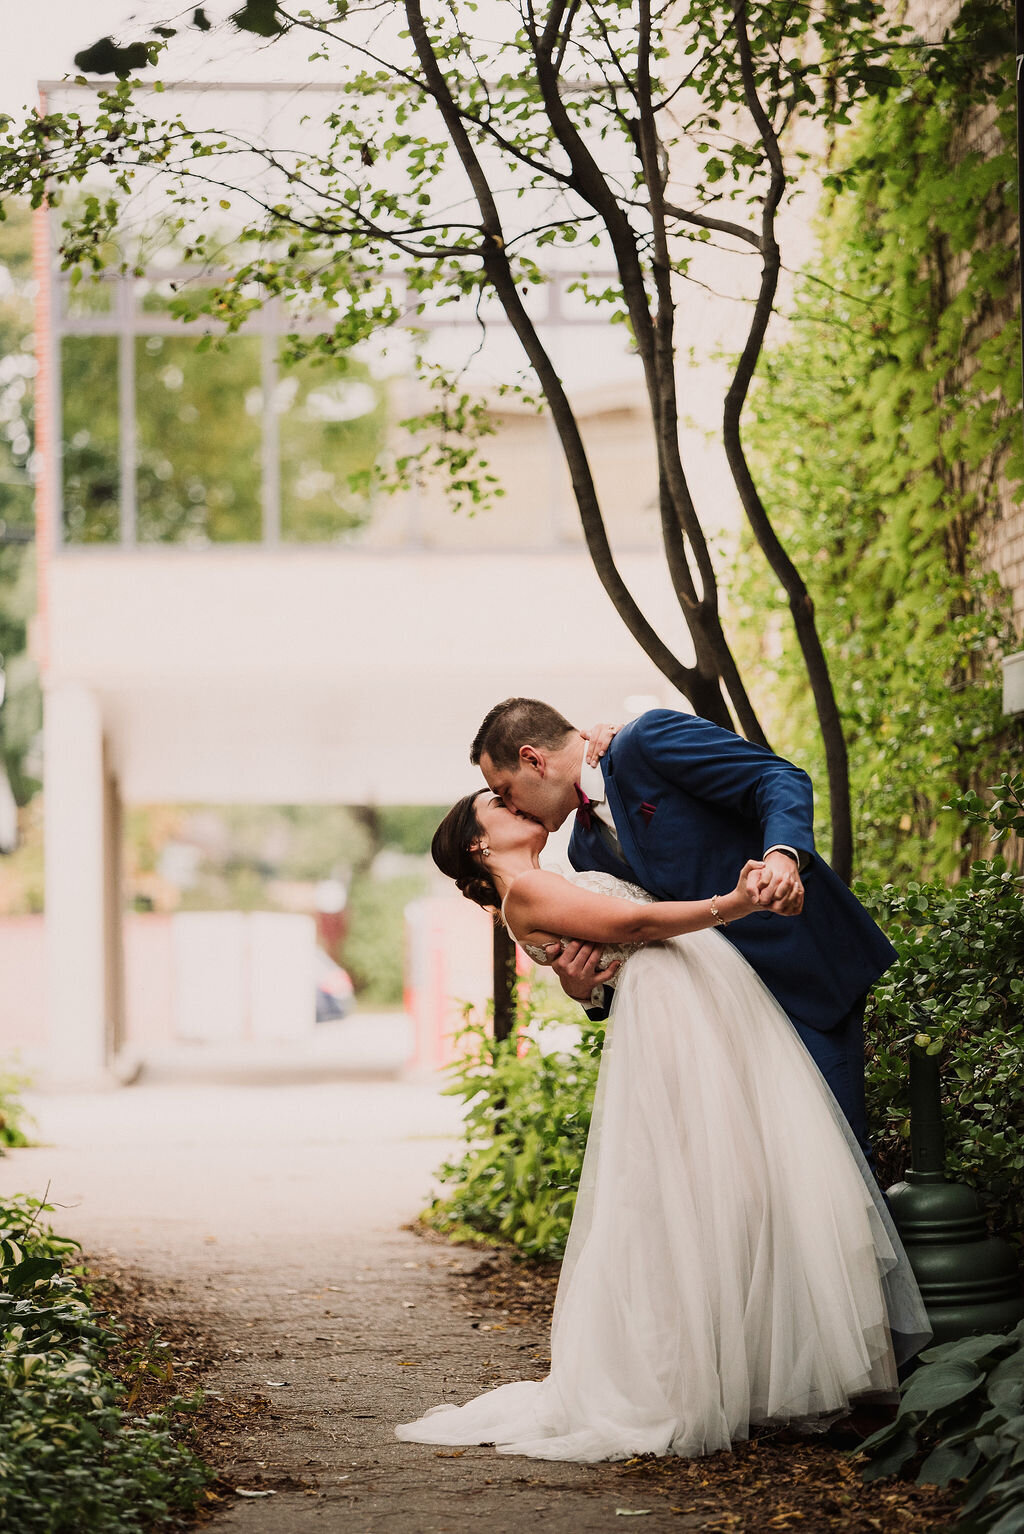 Bride and groom kissing in an alley